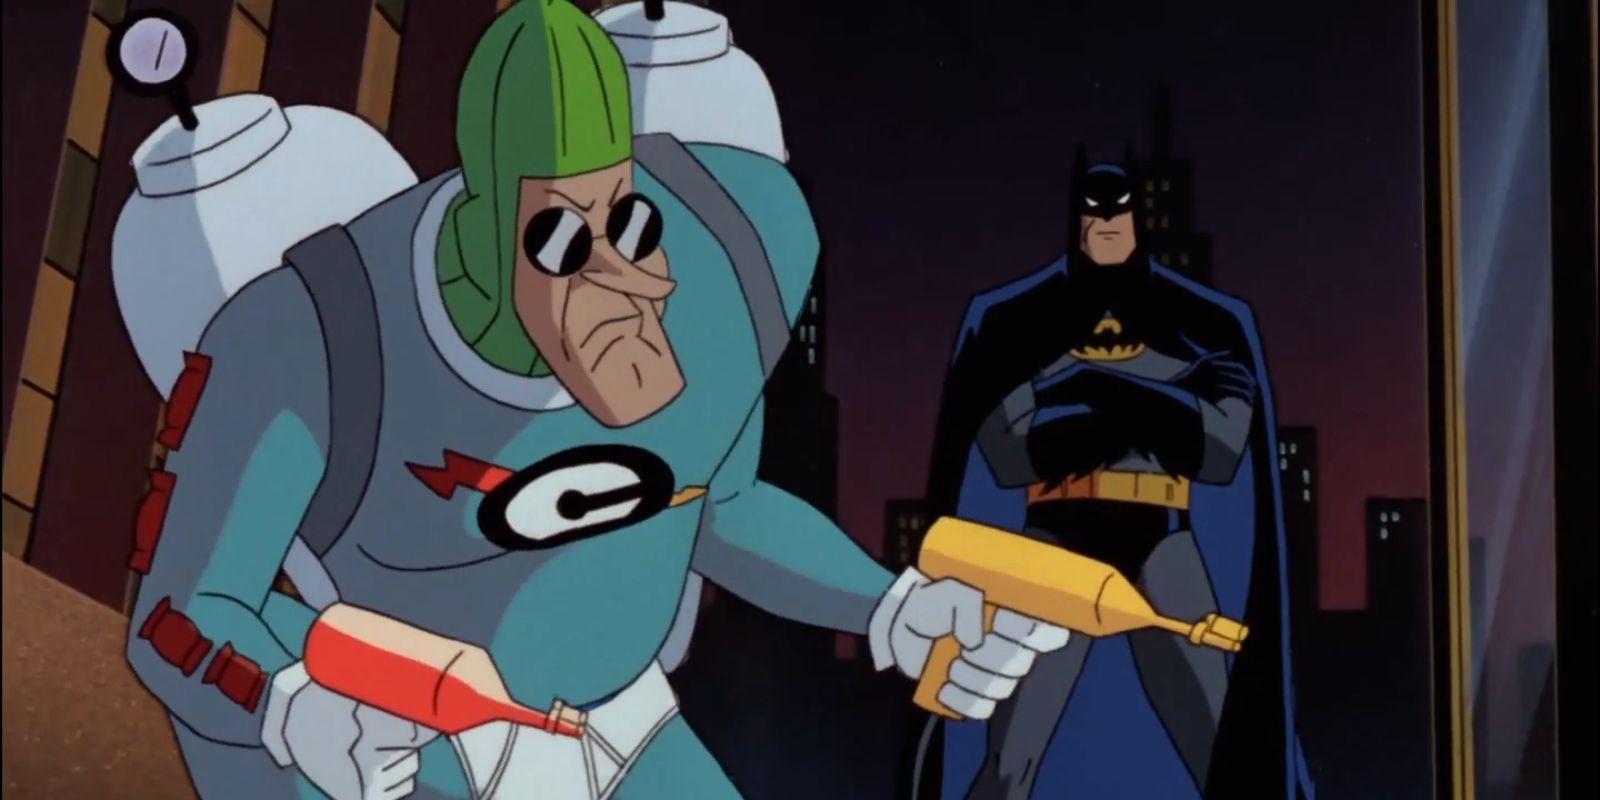 10 Funniest Episodes Of Batman The Animated Series Ranked